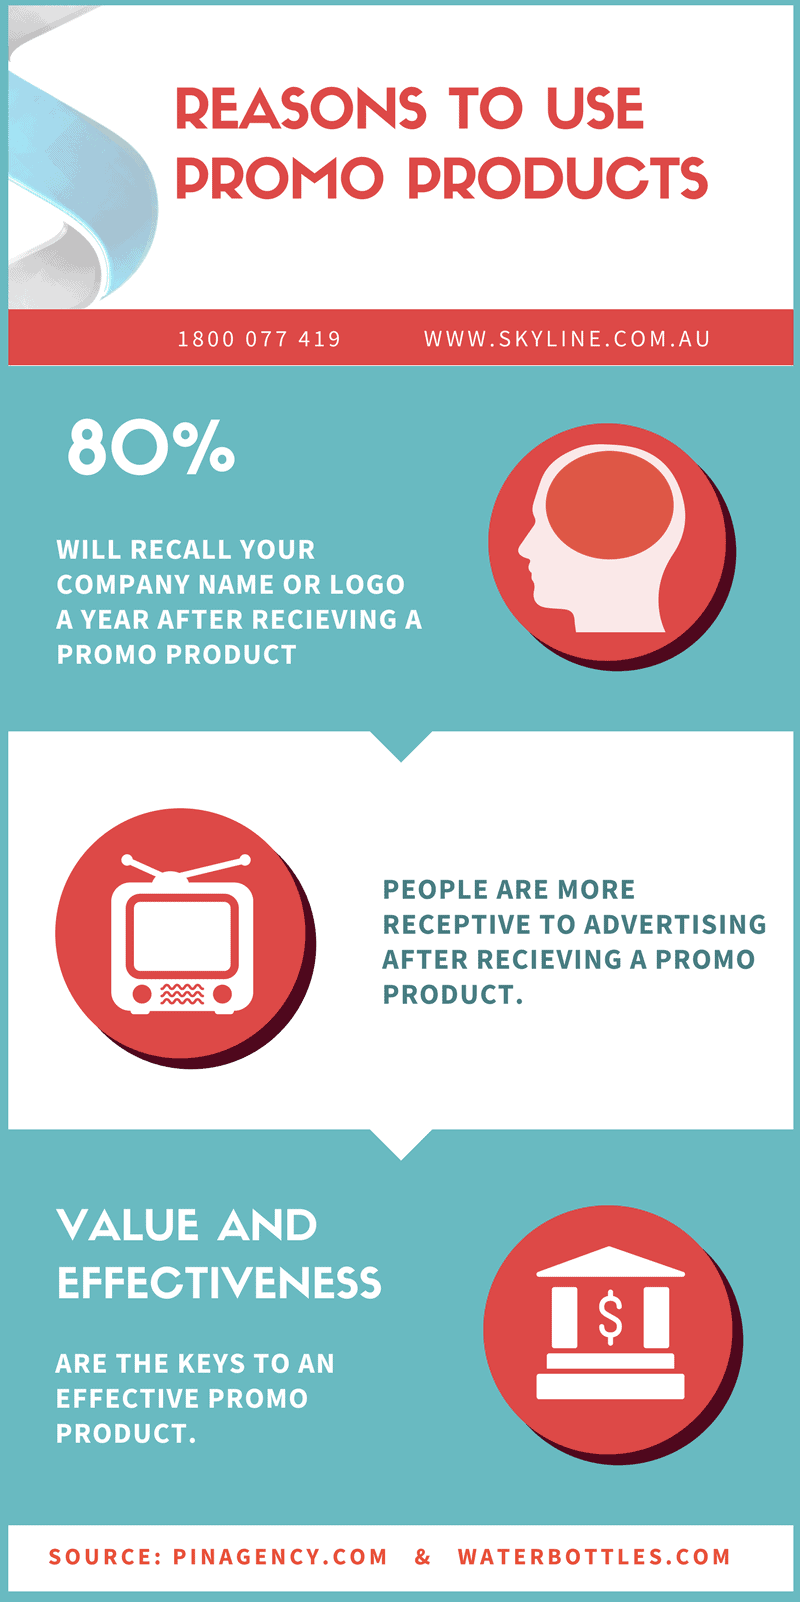 Reasons to Use Promo Products (1)